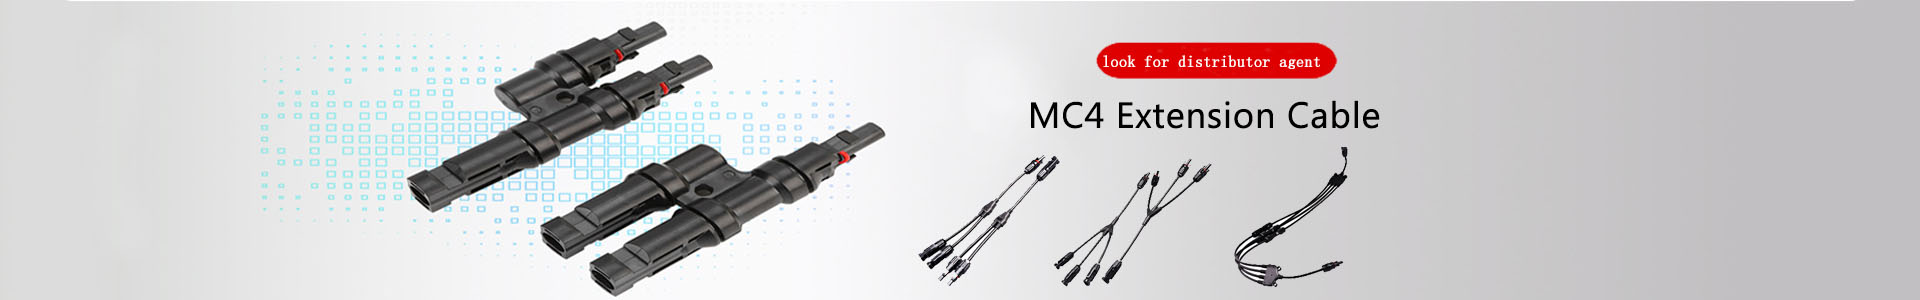 Diode Fuse Connector | Handwe Group-Solar | solar connector,solar branch connector,diode fuse connector,MC4 extnsion cable,H1Z2Z2 solar cable, UL4703 solar cable | Leading manufacturer and supplier of solar pv cables and connectors